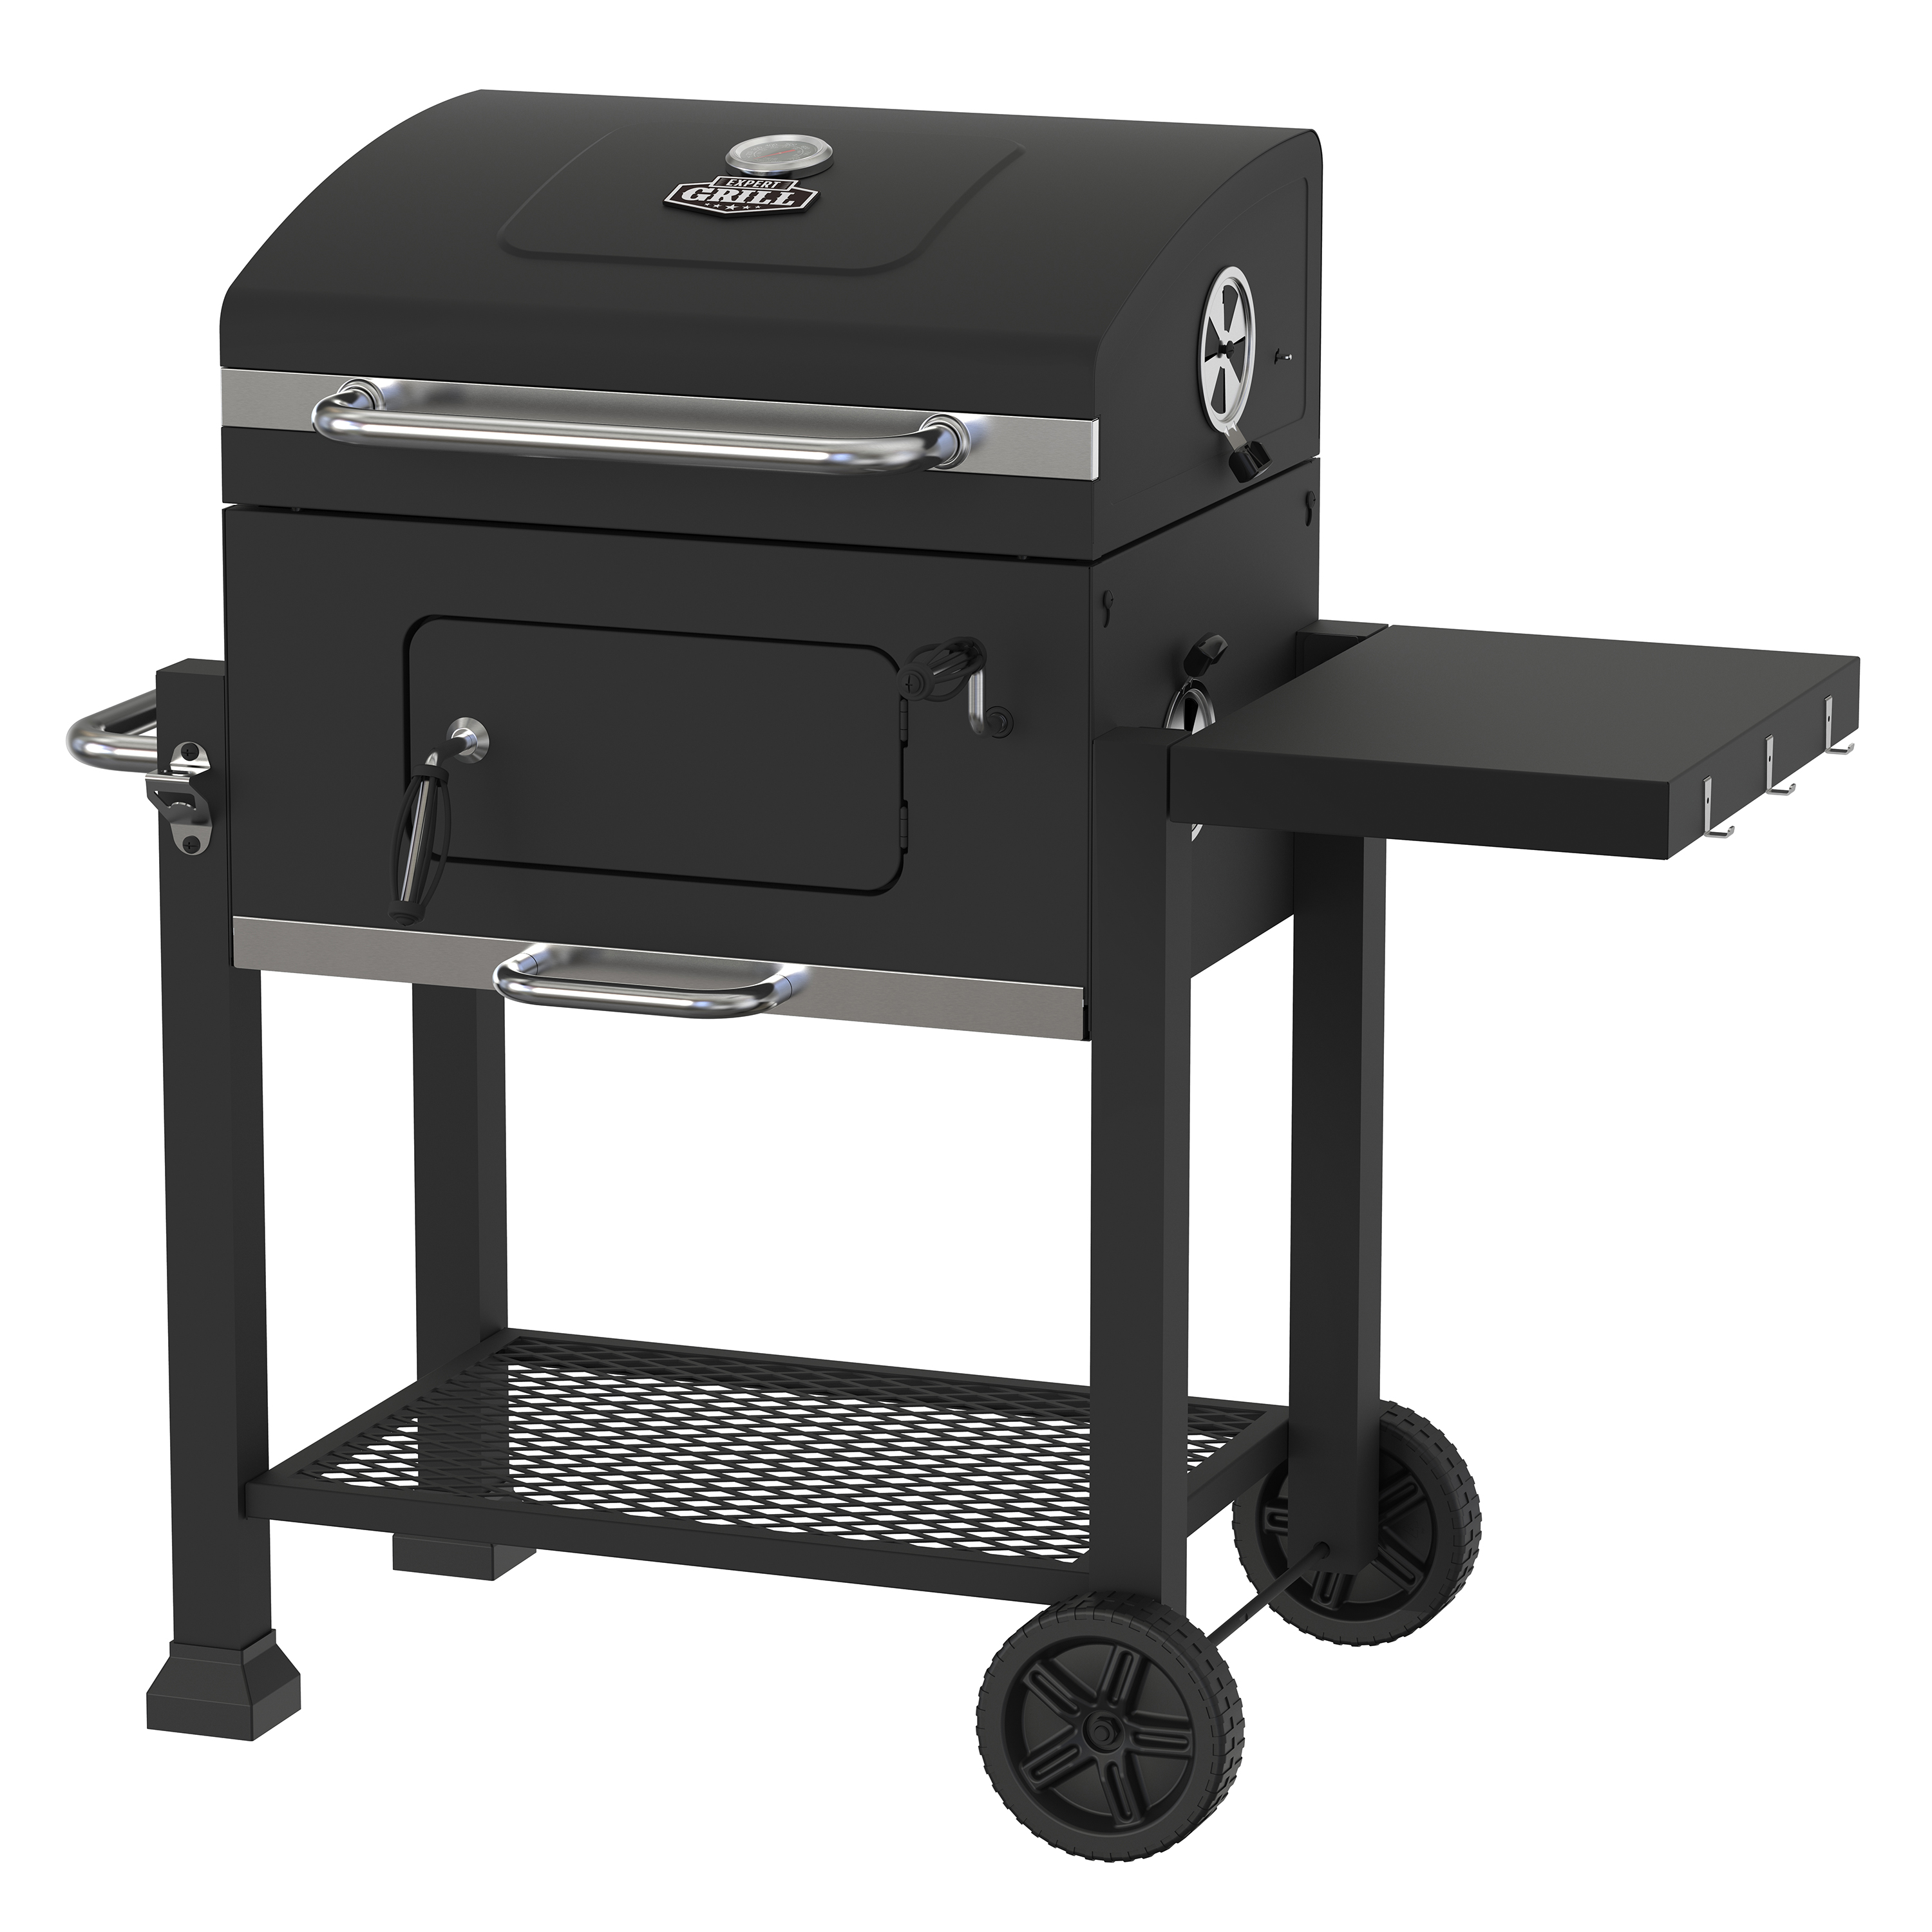 Expert Grill Heavy Duty 24-inch Charcoal Grill, Black - image 1 of 12